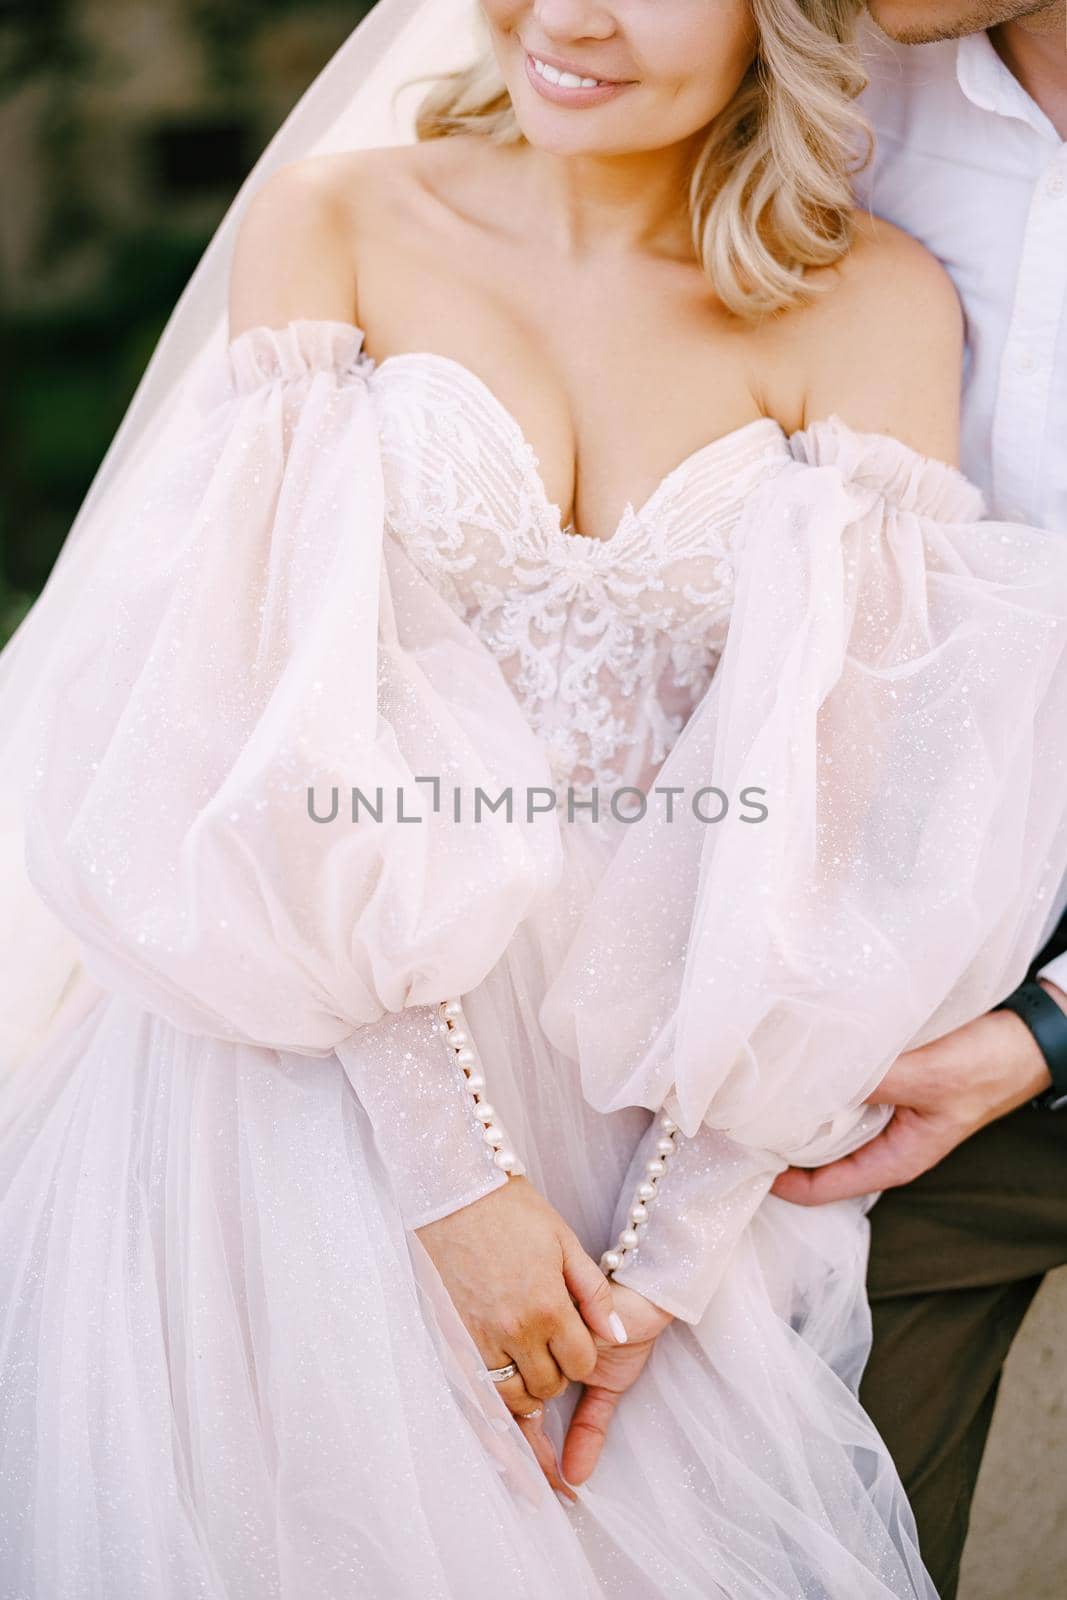 Wedding at an old winery villa in Tuscany, Italy. Close-up portrait of a wedding couple, the groom hugs the bride. by Nadtochiy